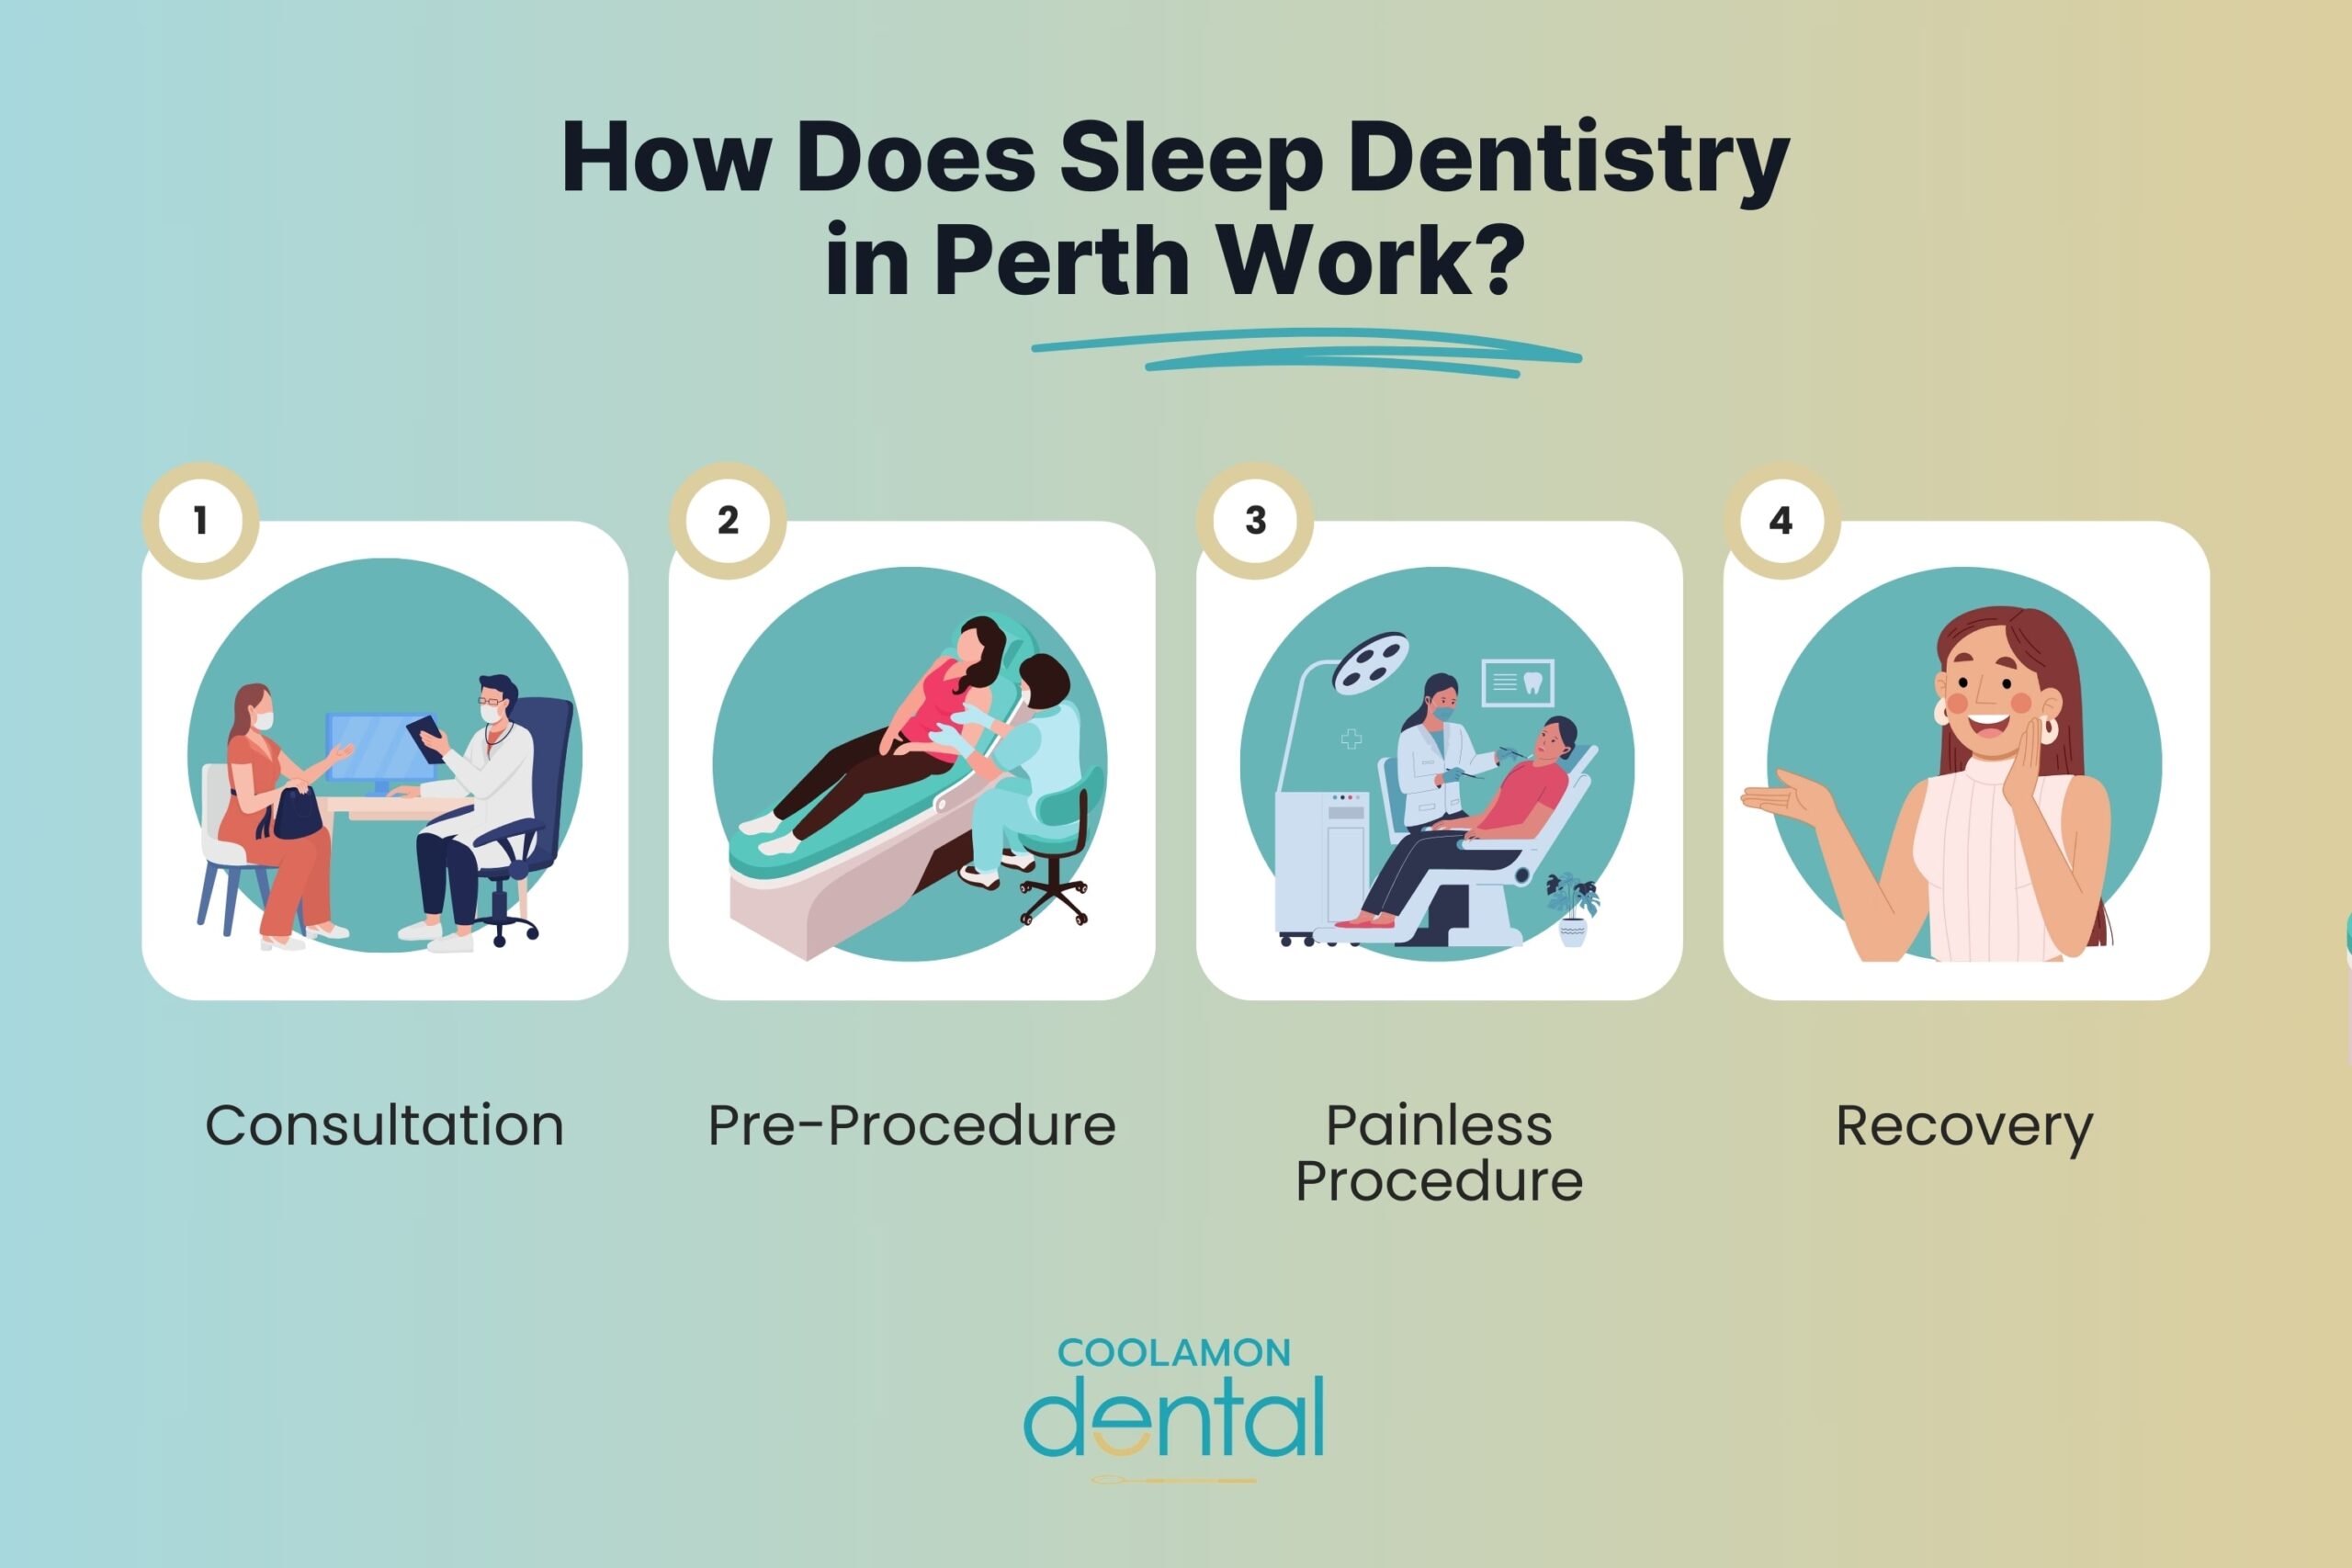 How Does Sleep Dentistry in Perth Work